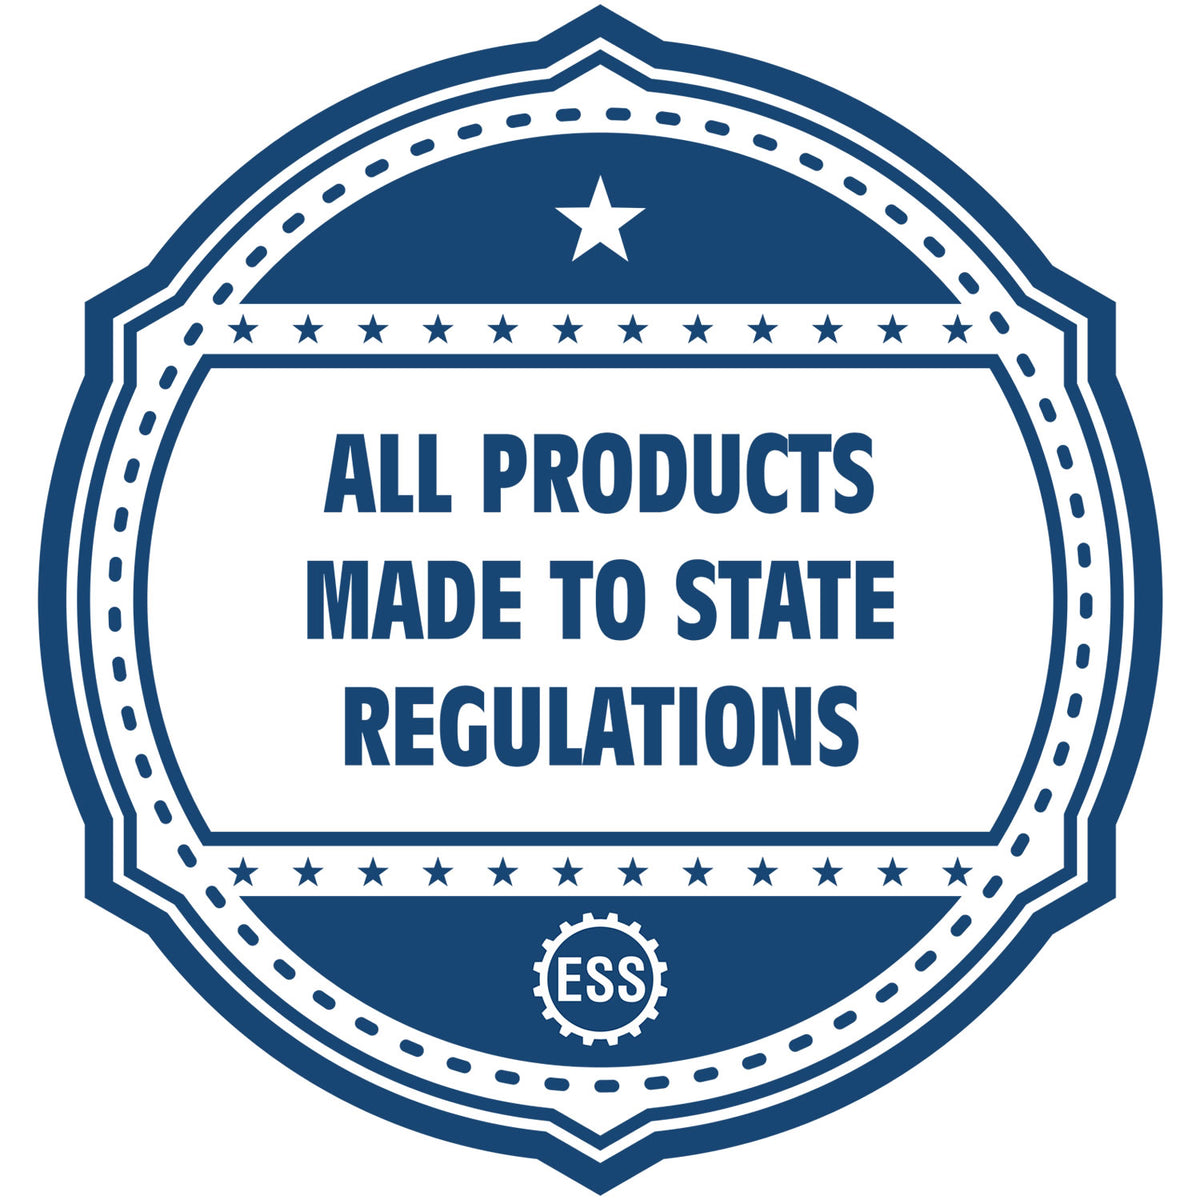 An icon or badge element for the New York Desk Architect Embossing Seal showing that this product is made in compliance with state regulations.